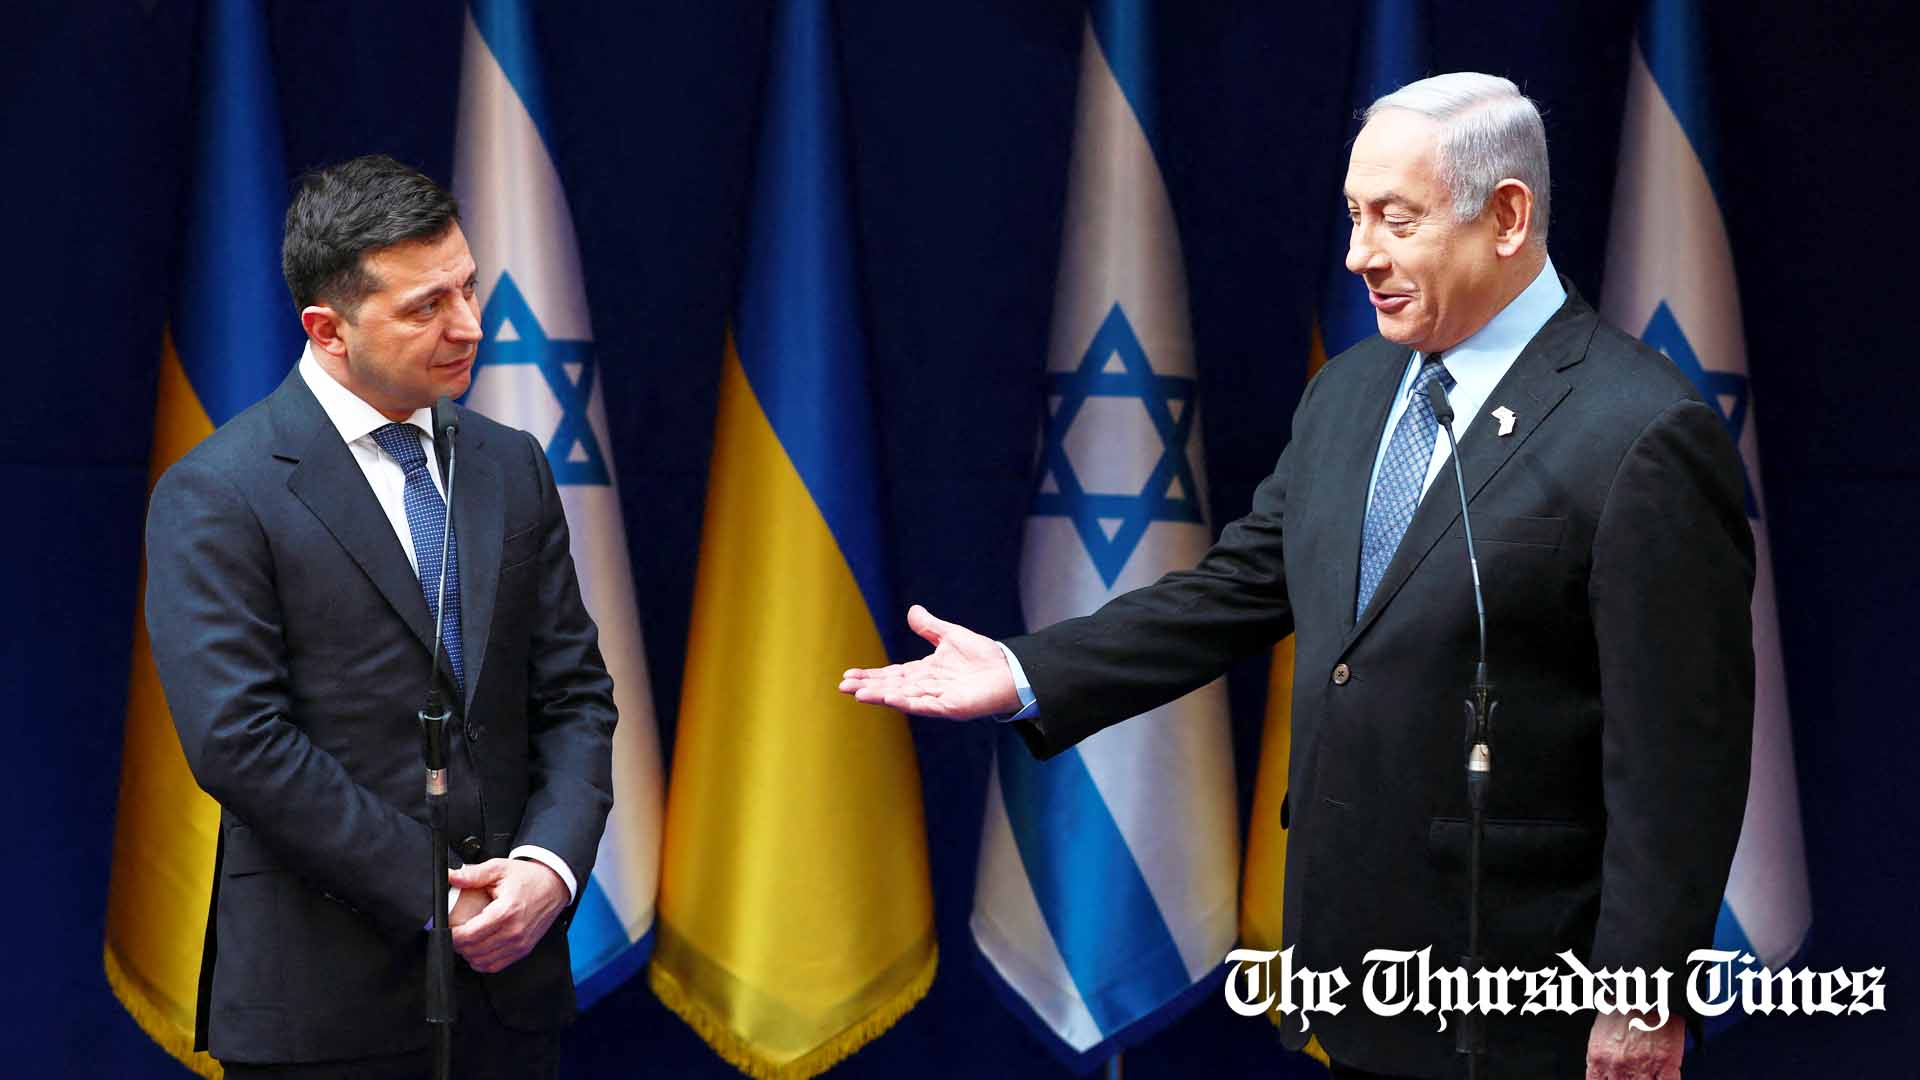 A file photo is shown of Ukrainian president Volodymyr Zelenskyy (L) and Israeli prime minister Benjamin Netanyahu (R) together in 2020. — FILE/REUTERS